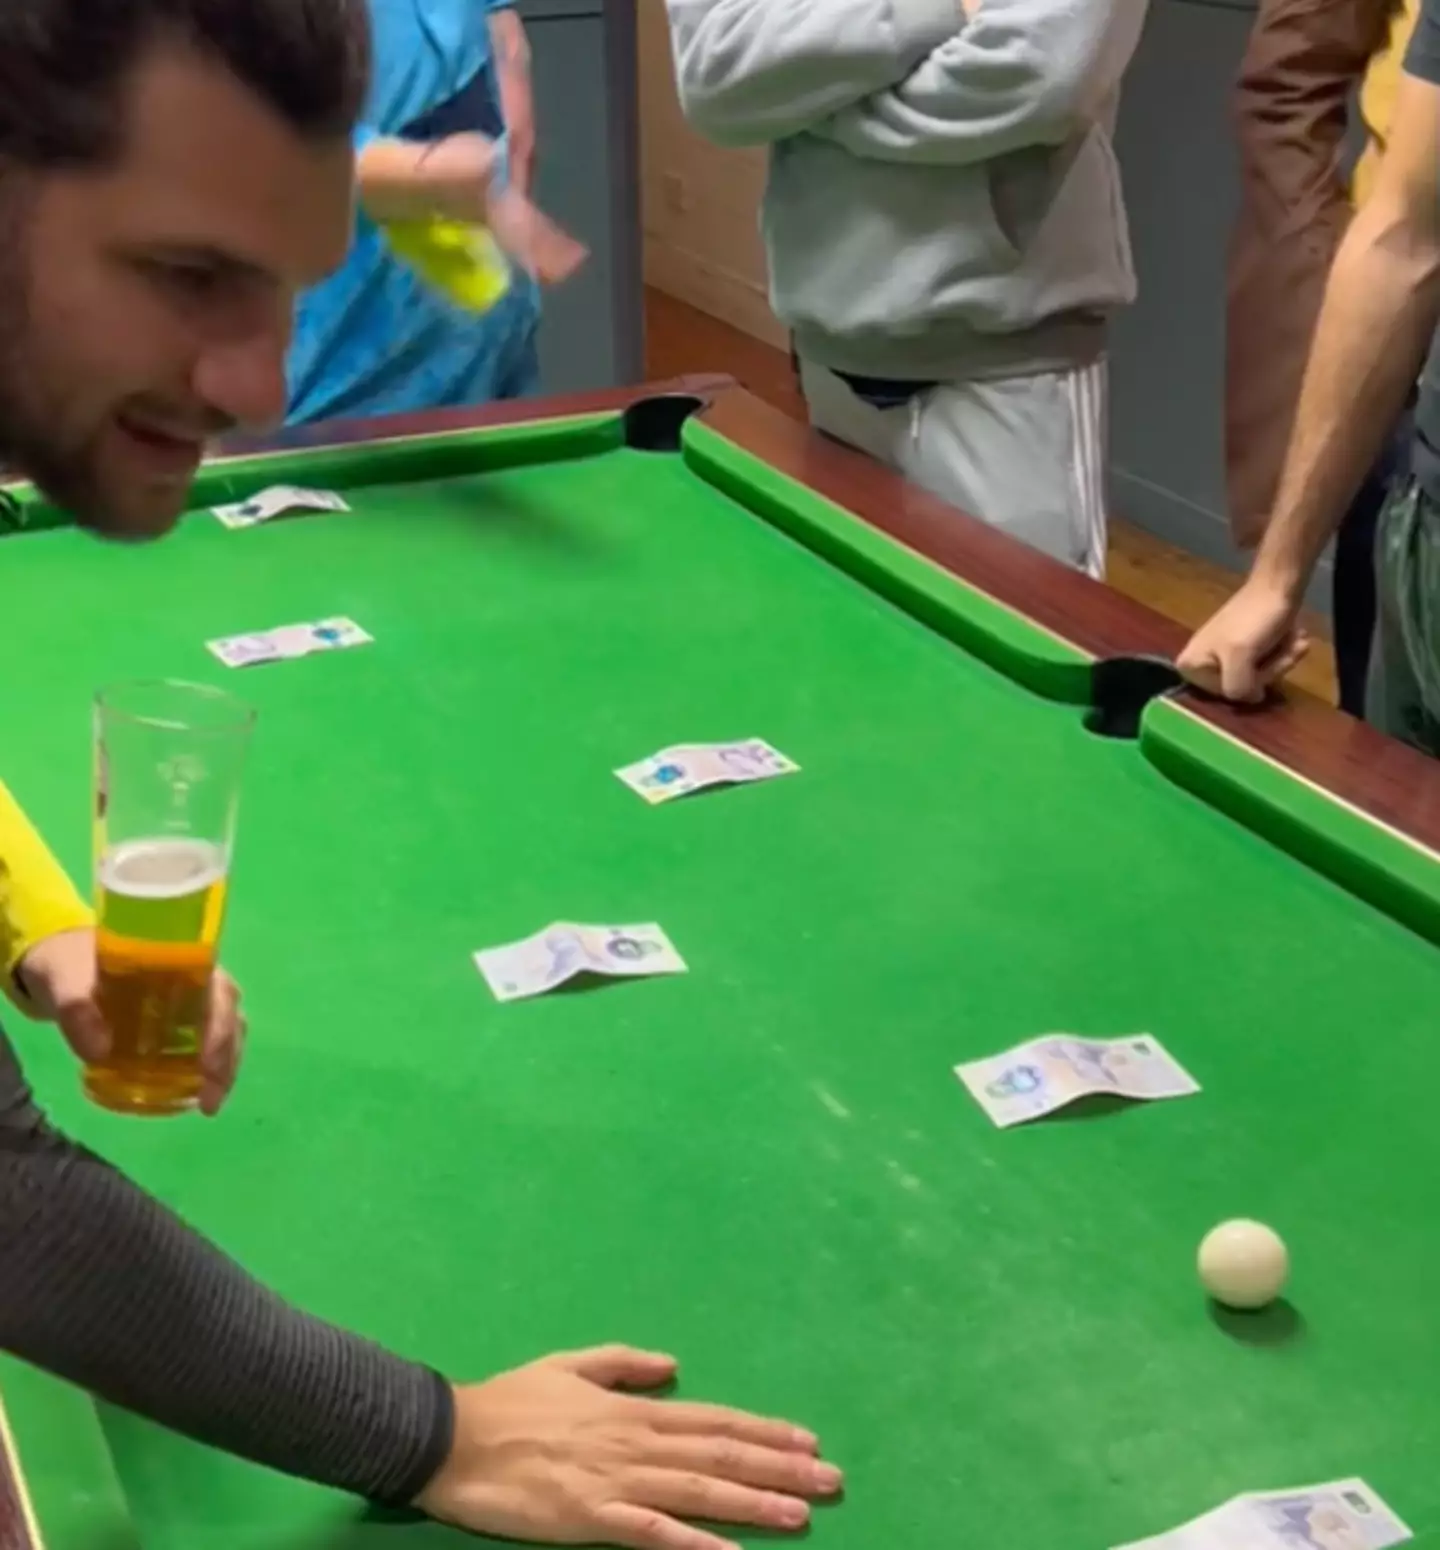 A bunch of lads have gone viral for inventing a new pub game which requires pretty much no skill and a bit of luck.